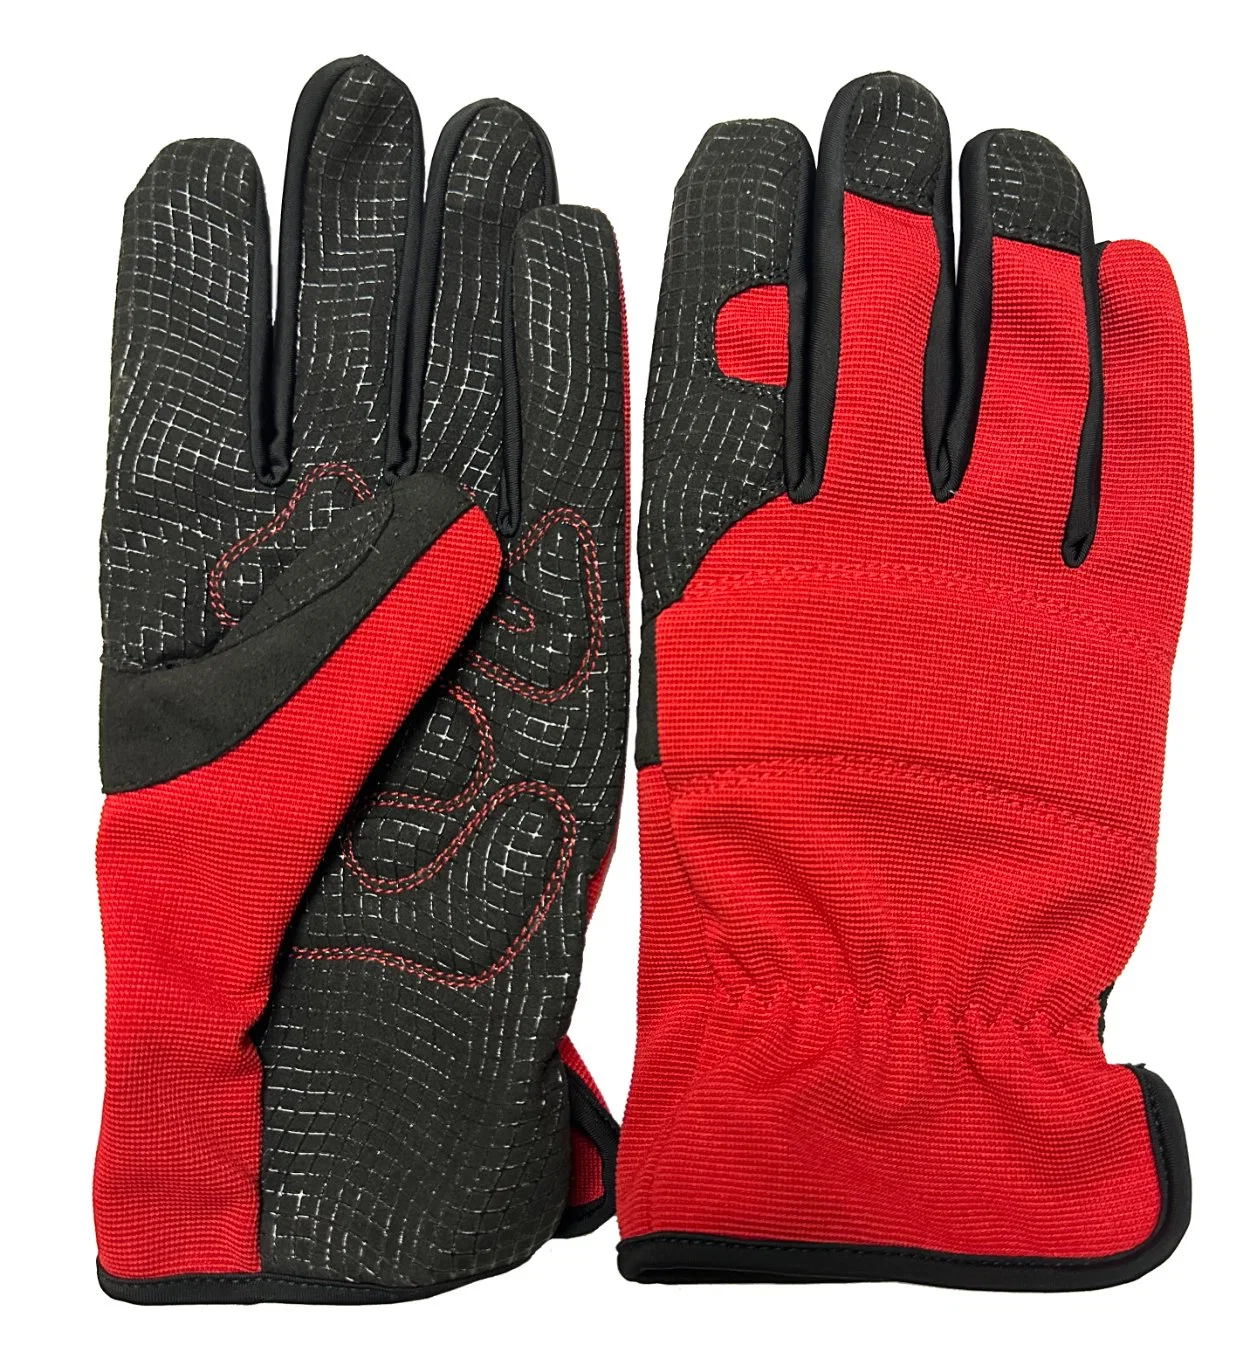 Non Slip Super Grip Synthetic Leather Mechanic Work Gloves